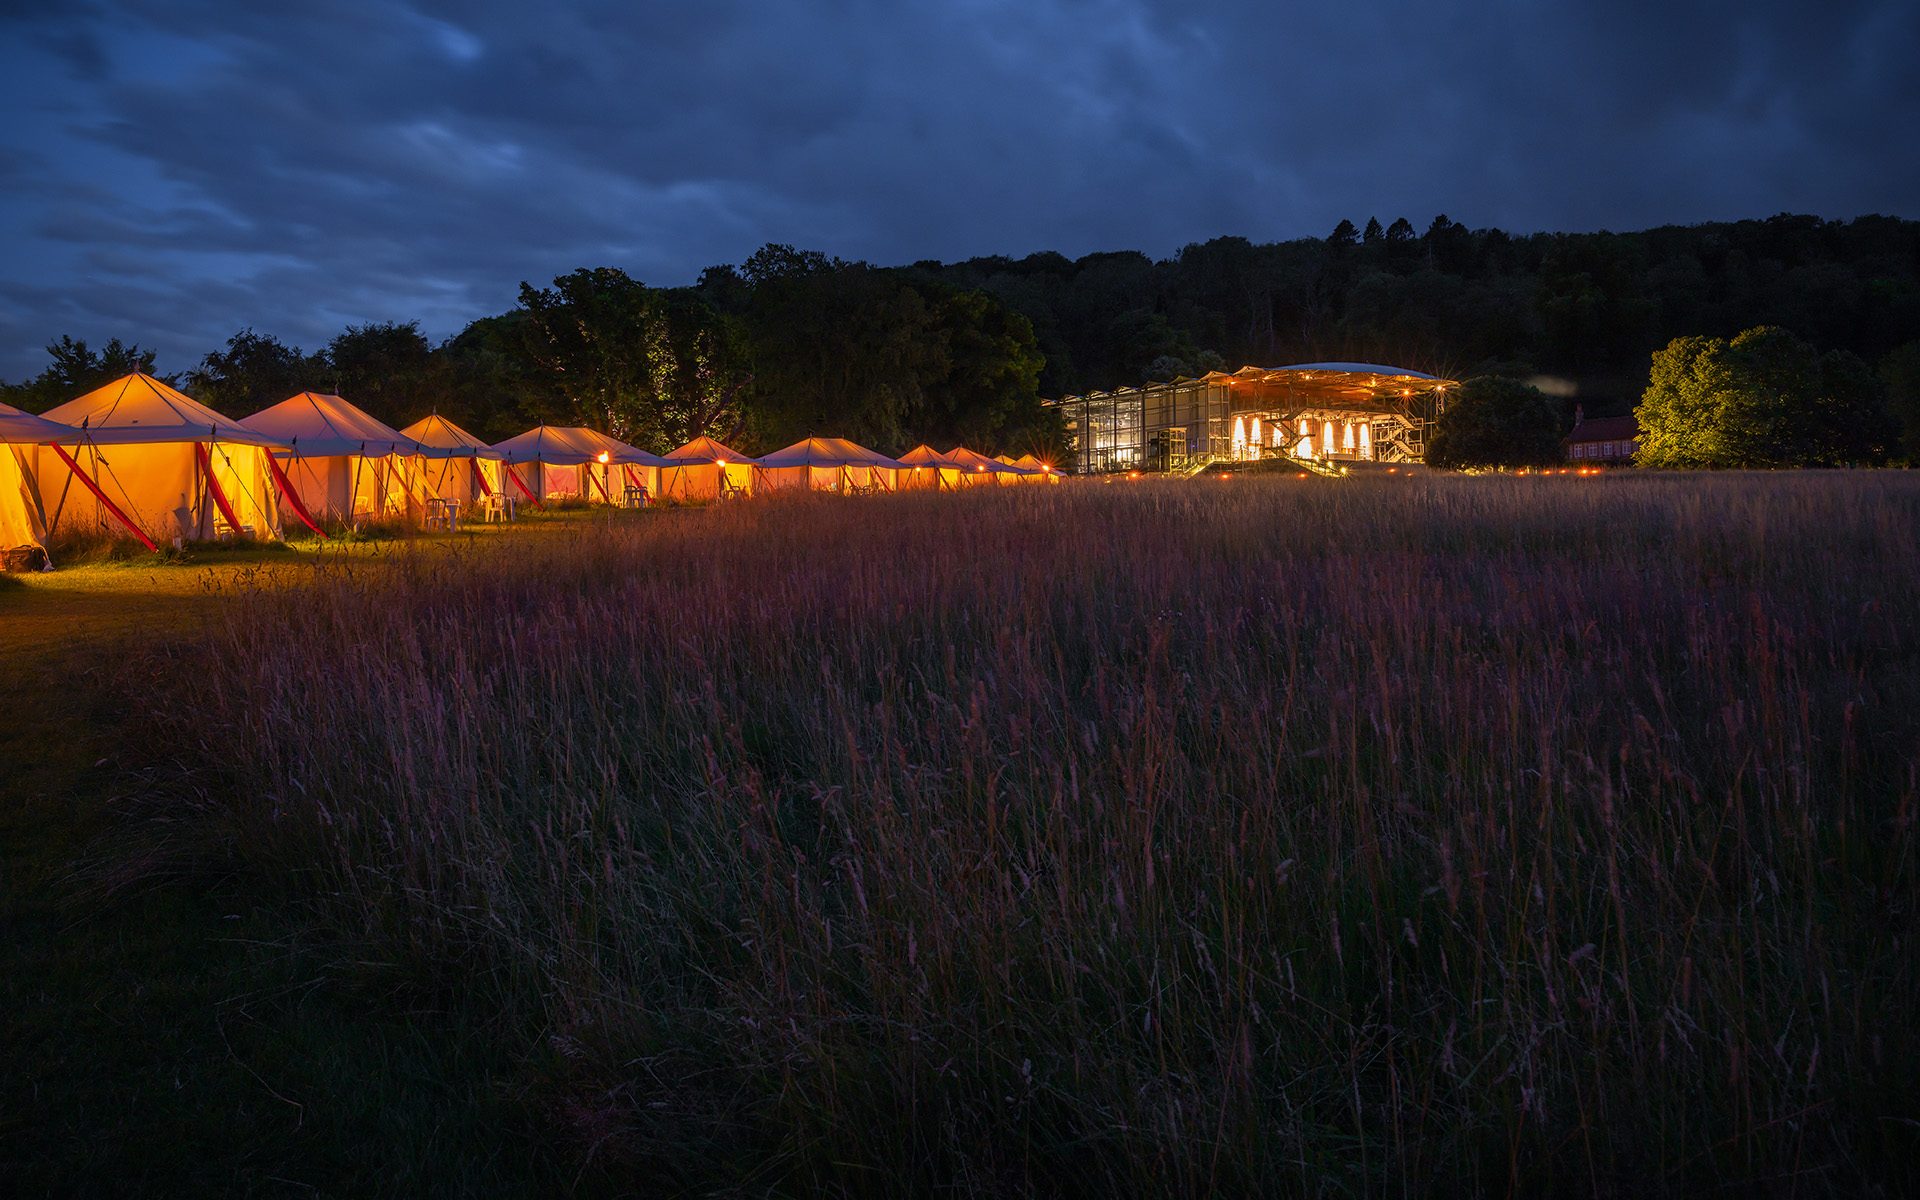 A line of warmly lit tents snake through the darkness towards the brightly lit opera pavilion in the distance.